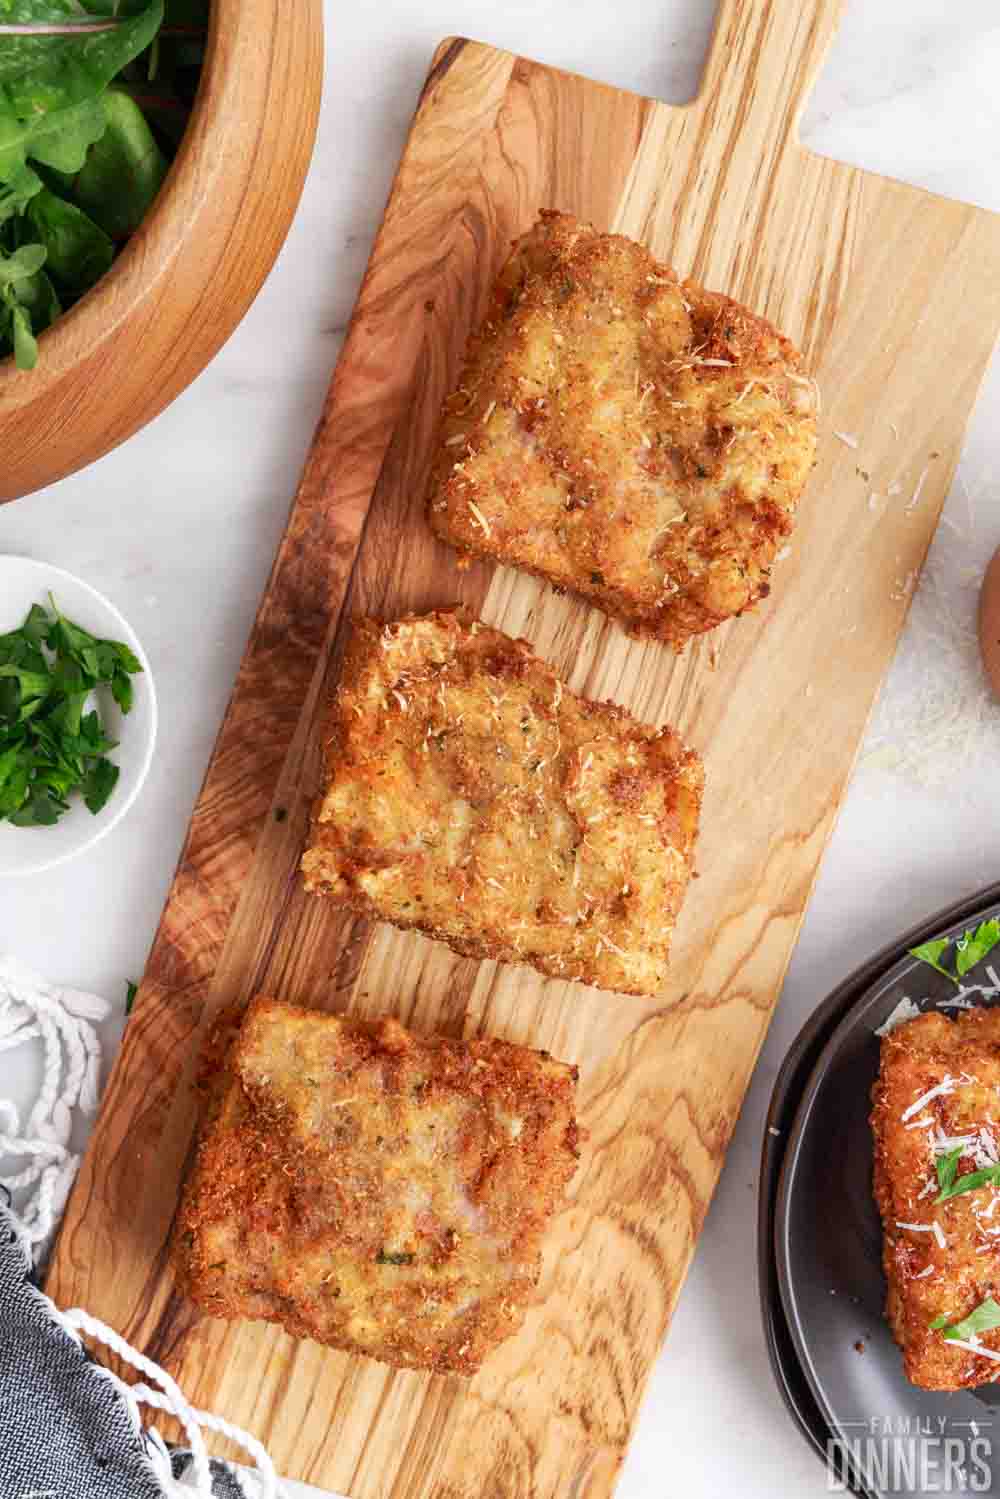 3 pieces of deep fried lasagna on a wood tray